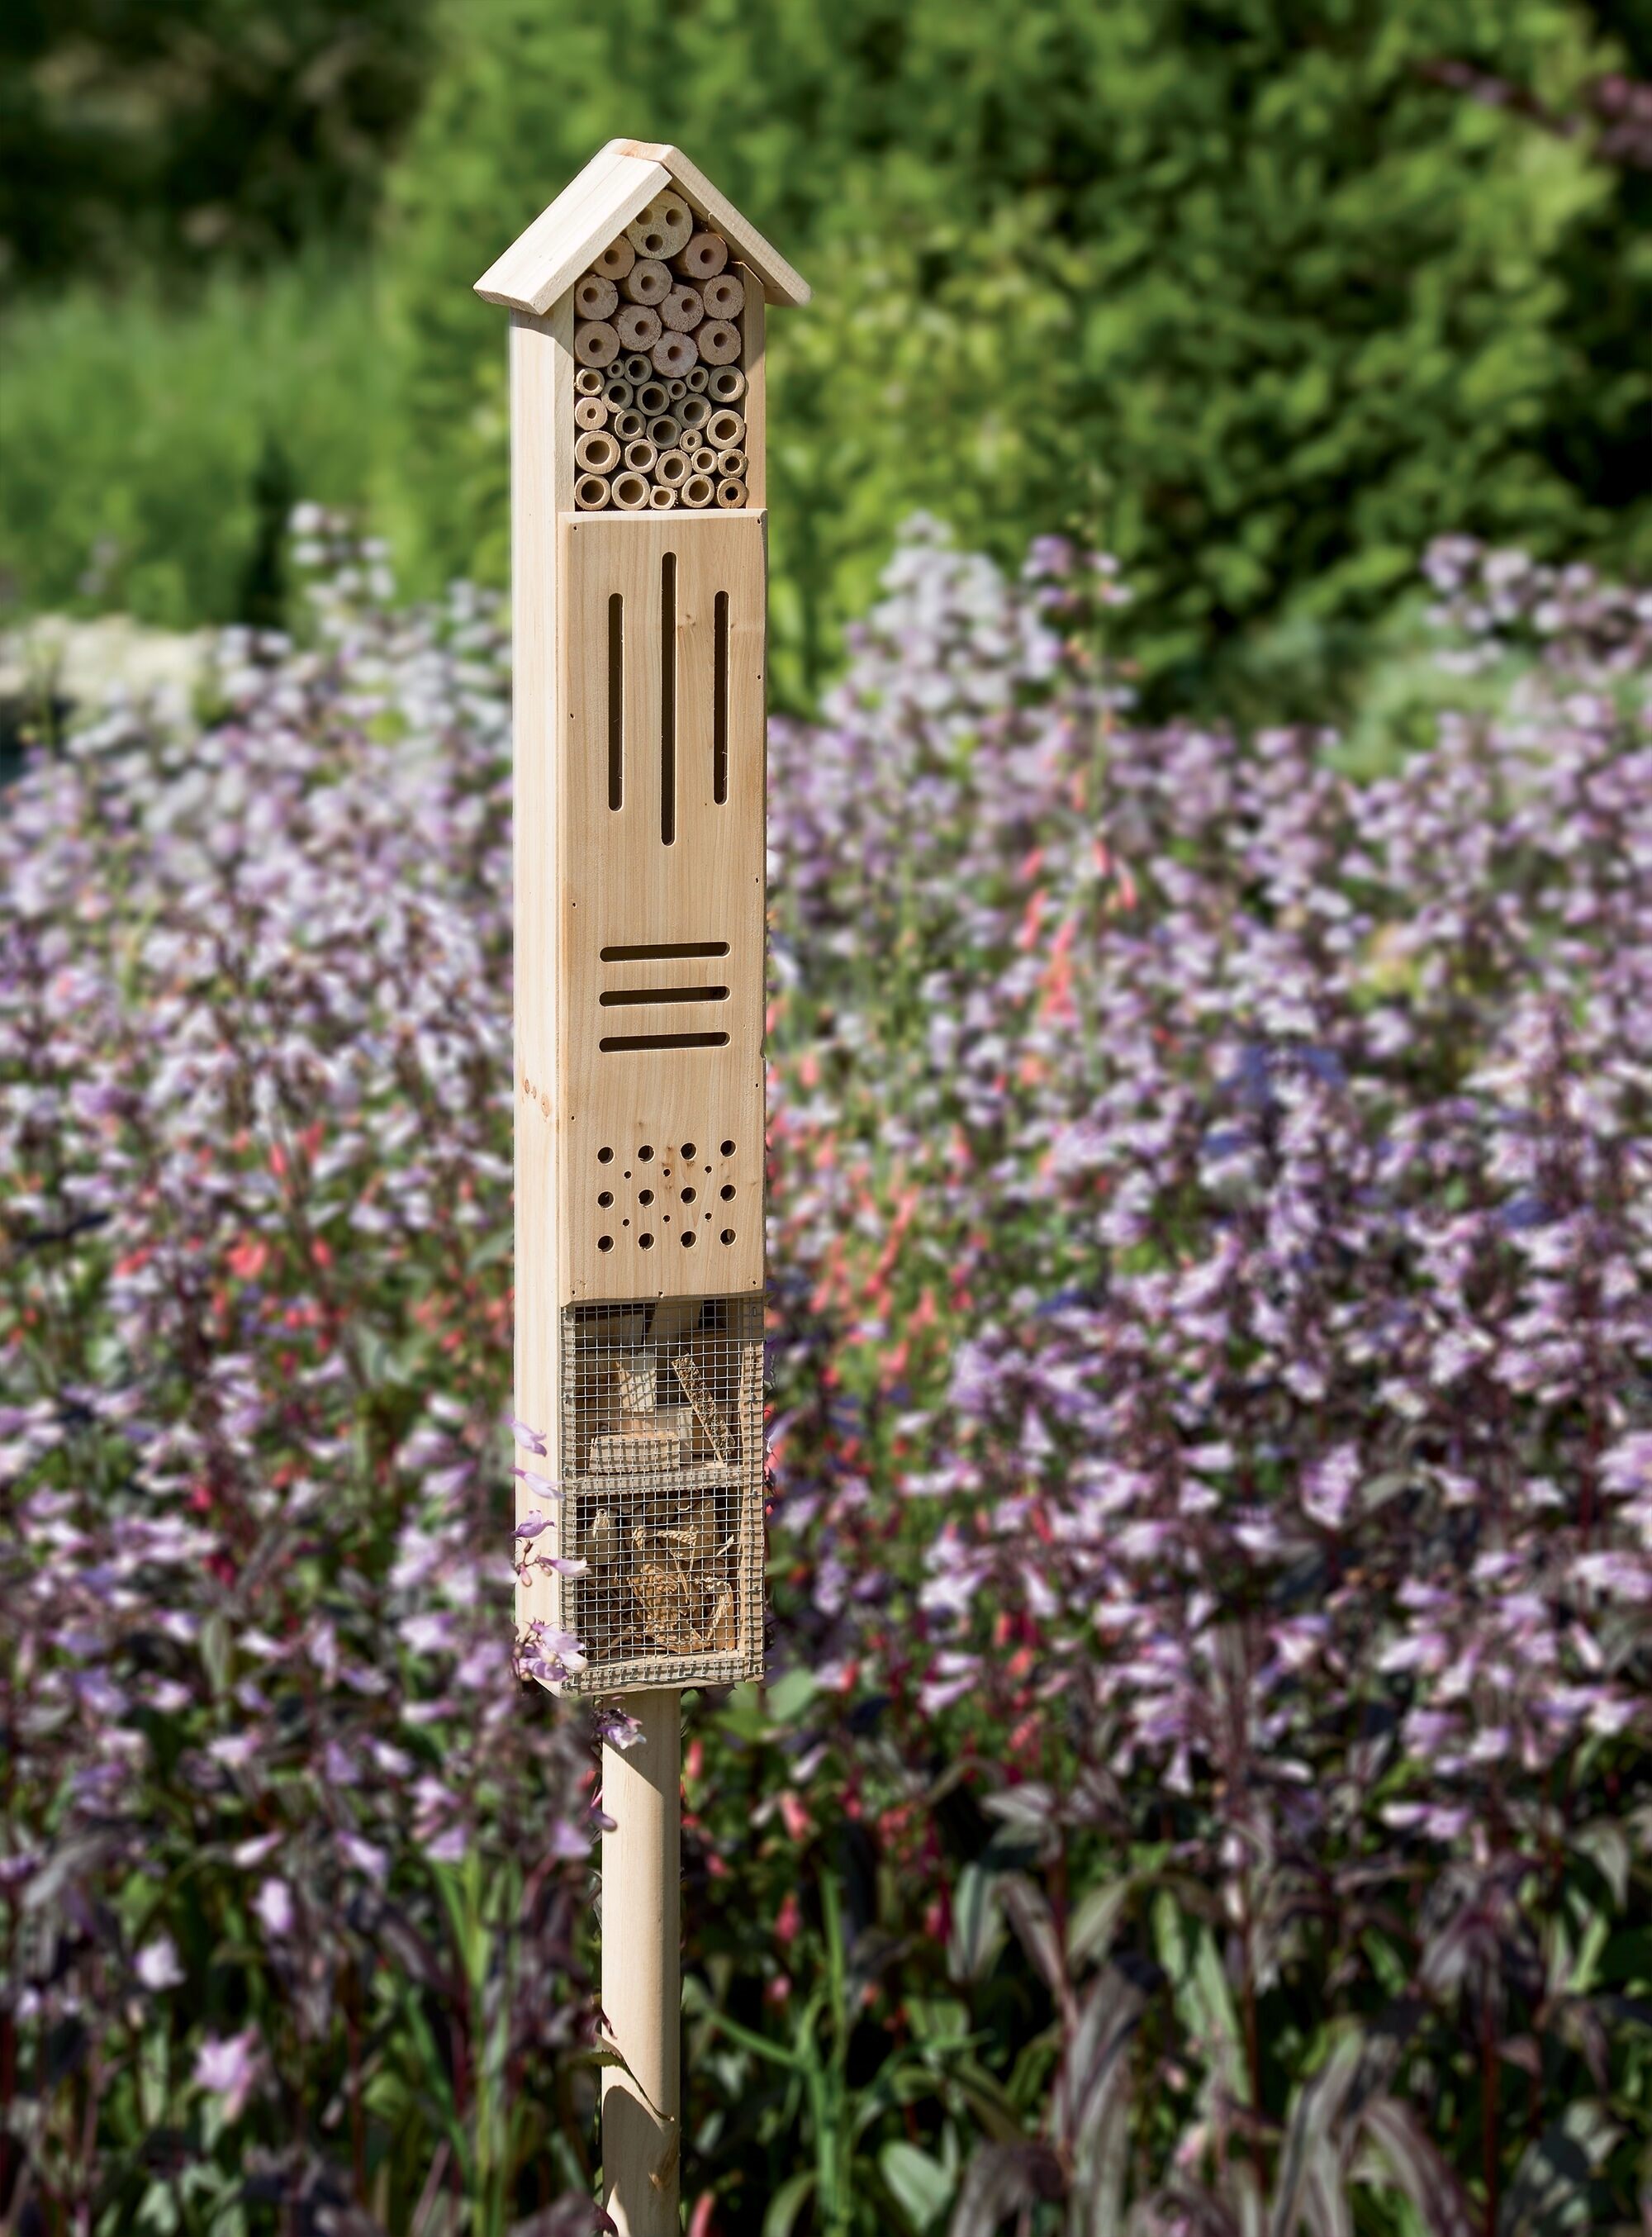 Wooden Insect Hotel 24x9x36 cm Clever Garden Great for All Types of Outside Insects 